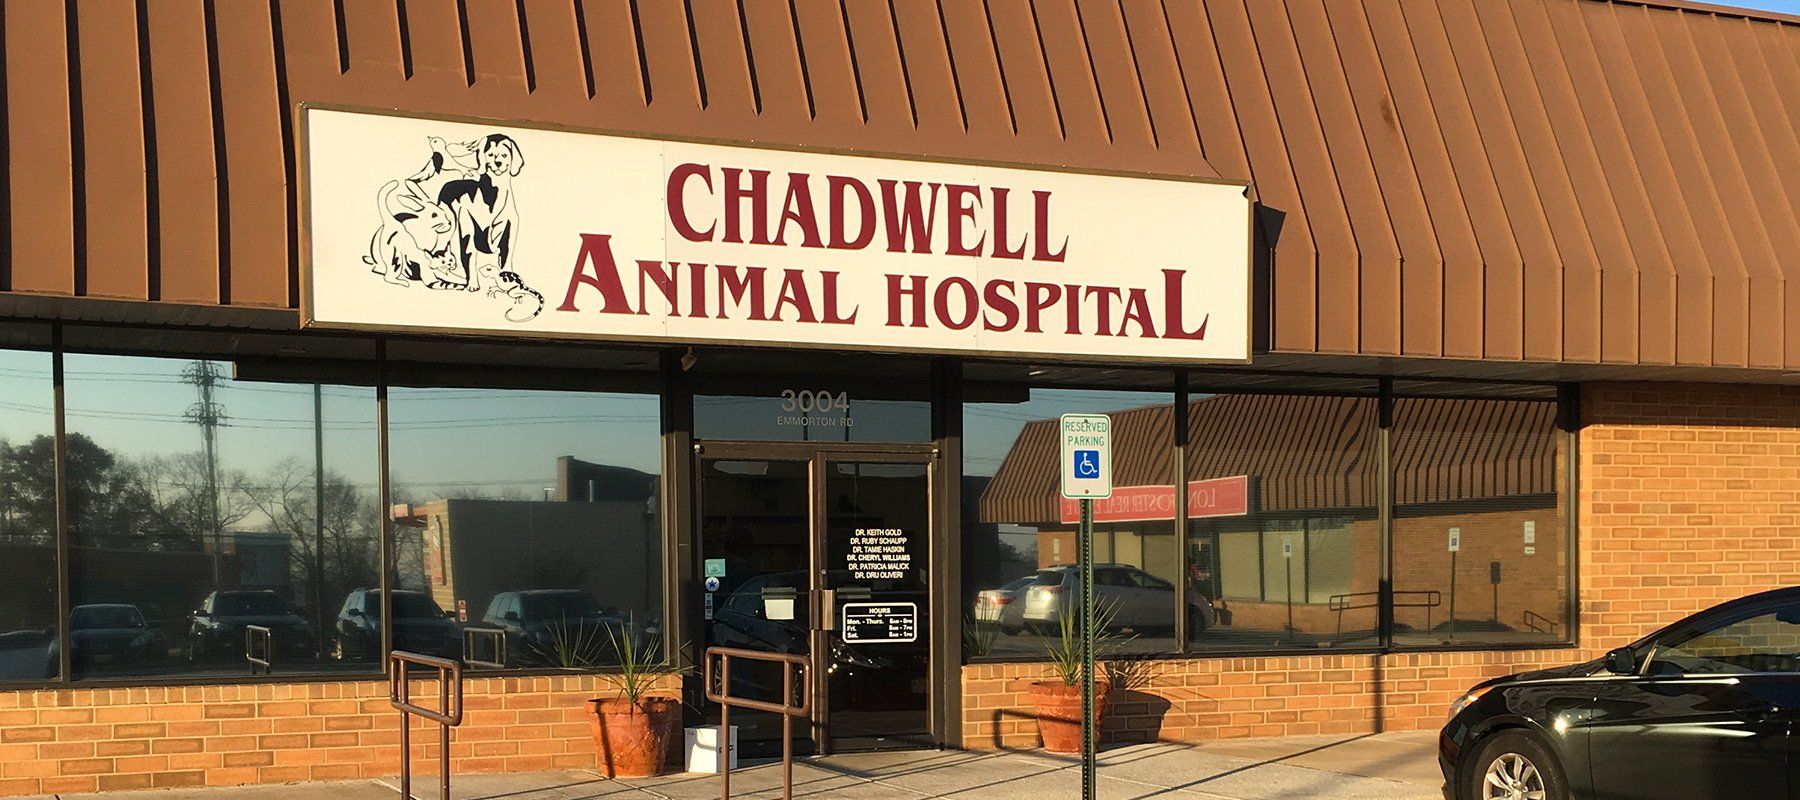 Chadwell Animal Hospital - front entrance